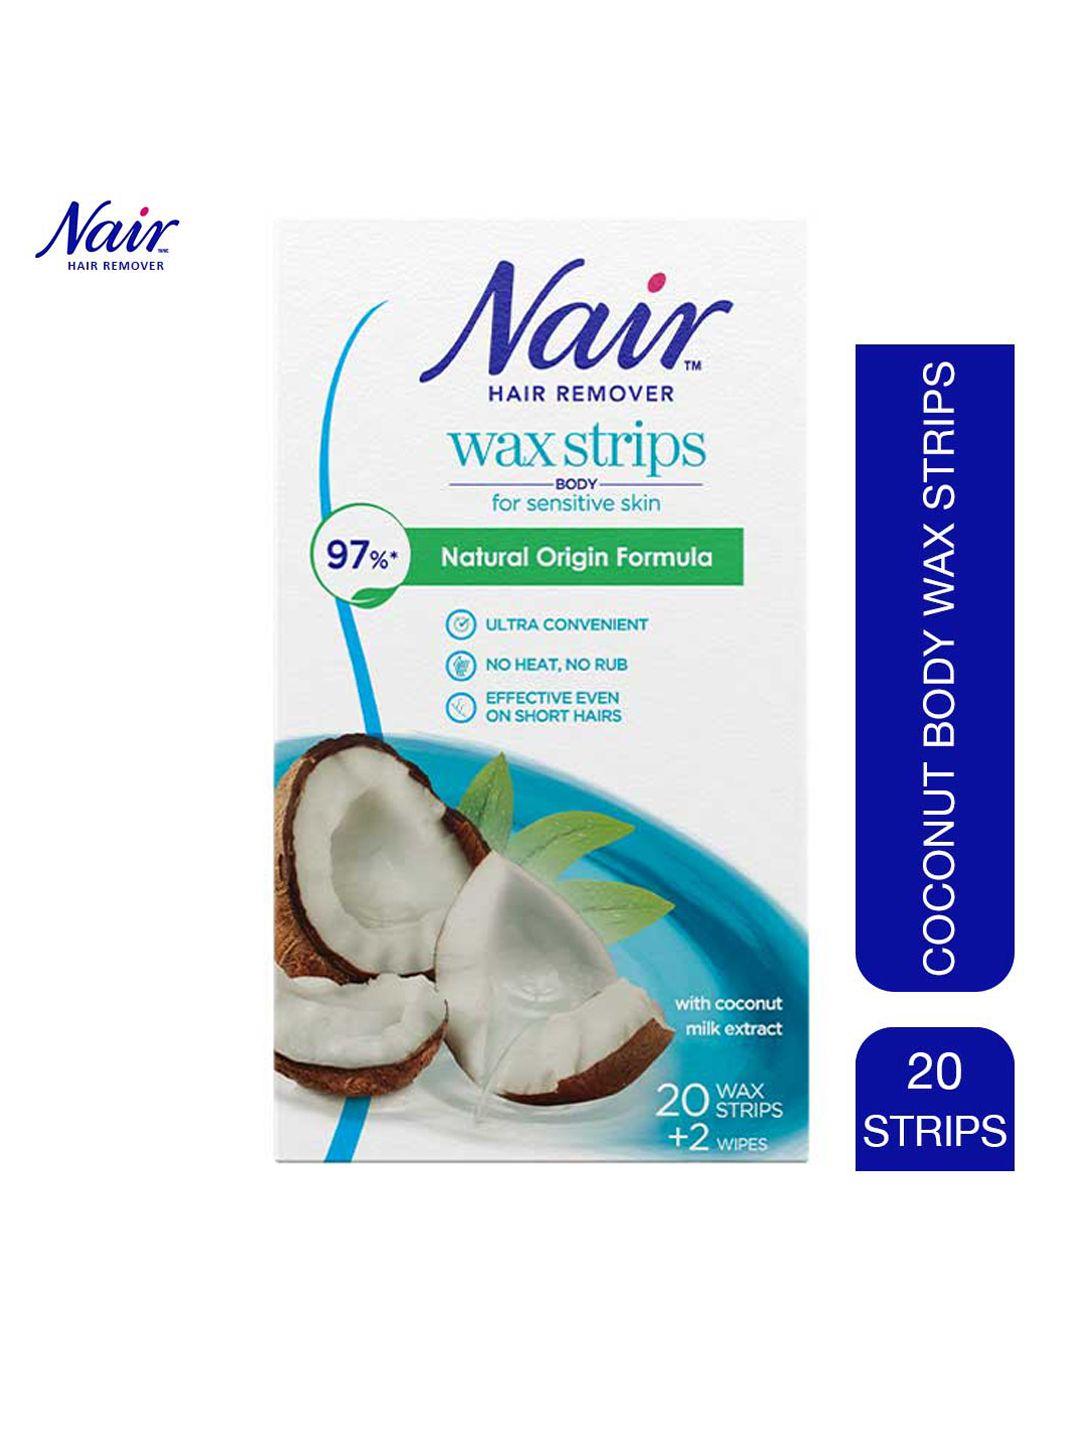 nair hair removal body wax strips for sensitive skin with coconut milk extracts- 20 strips